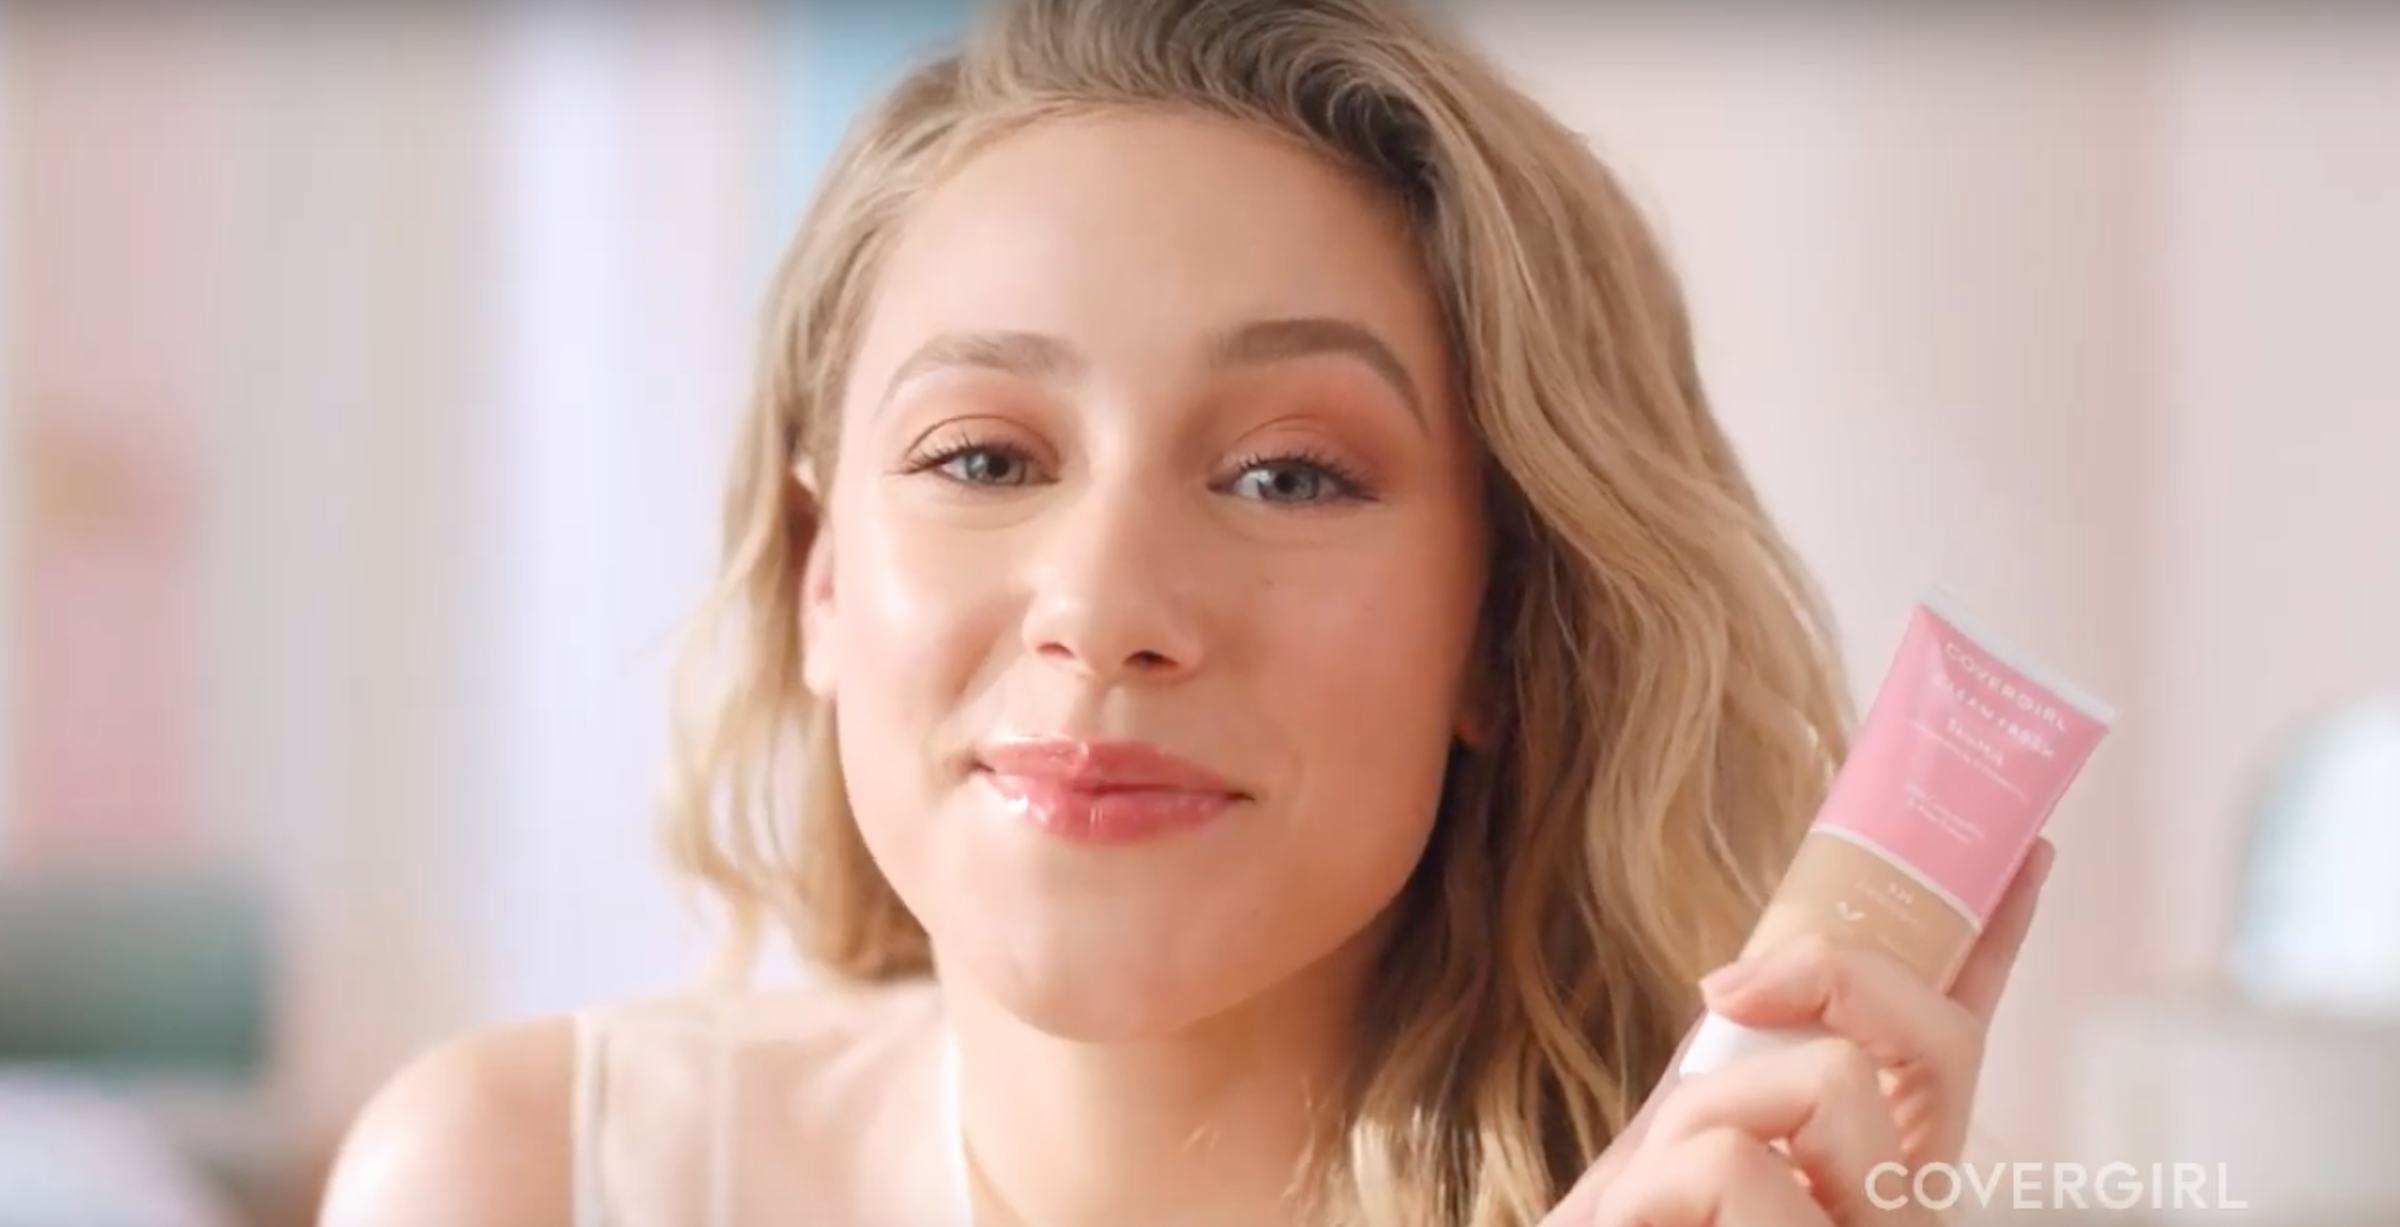 Lili Reinhart’s Covergirl Campaign Is A Glowing Debut